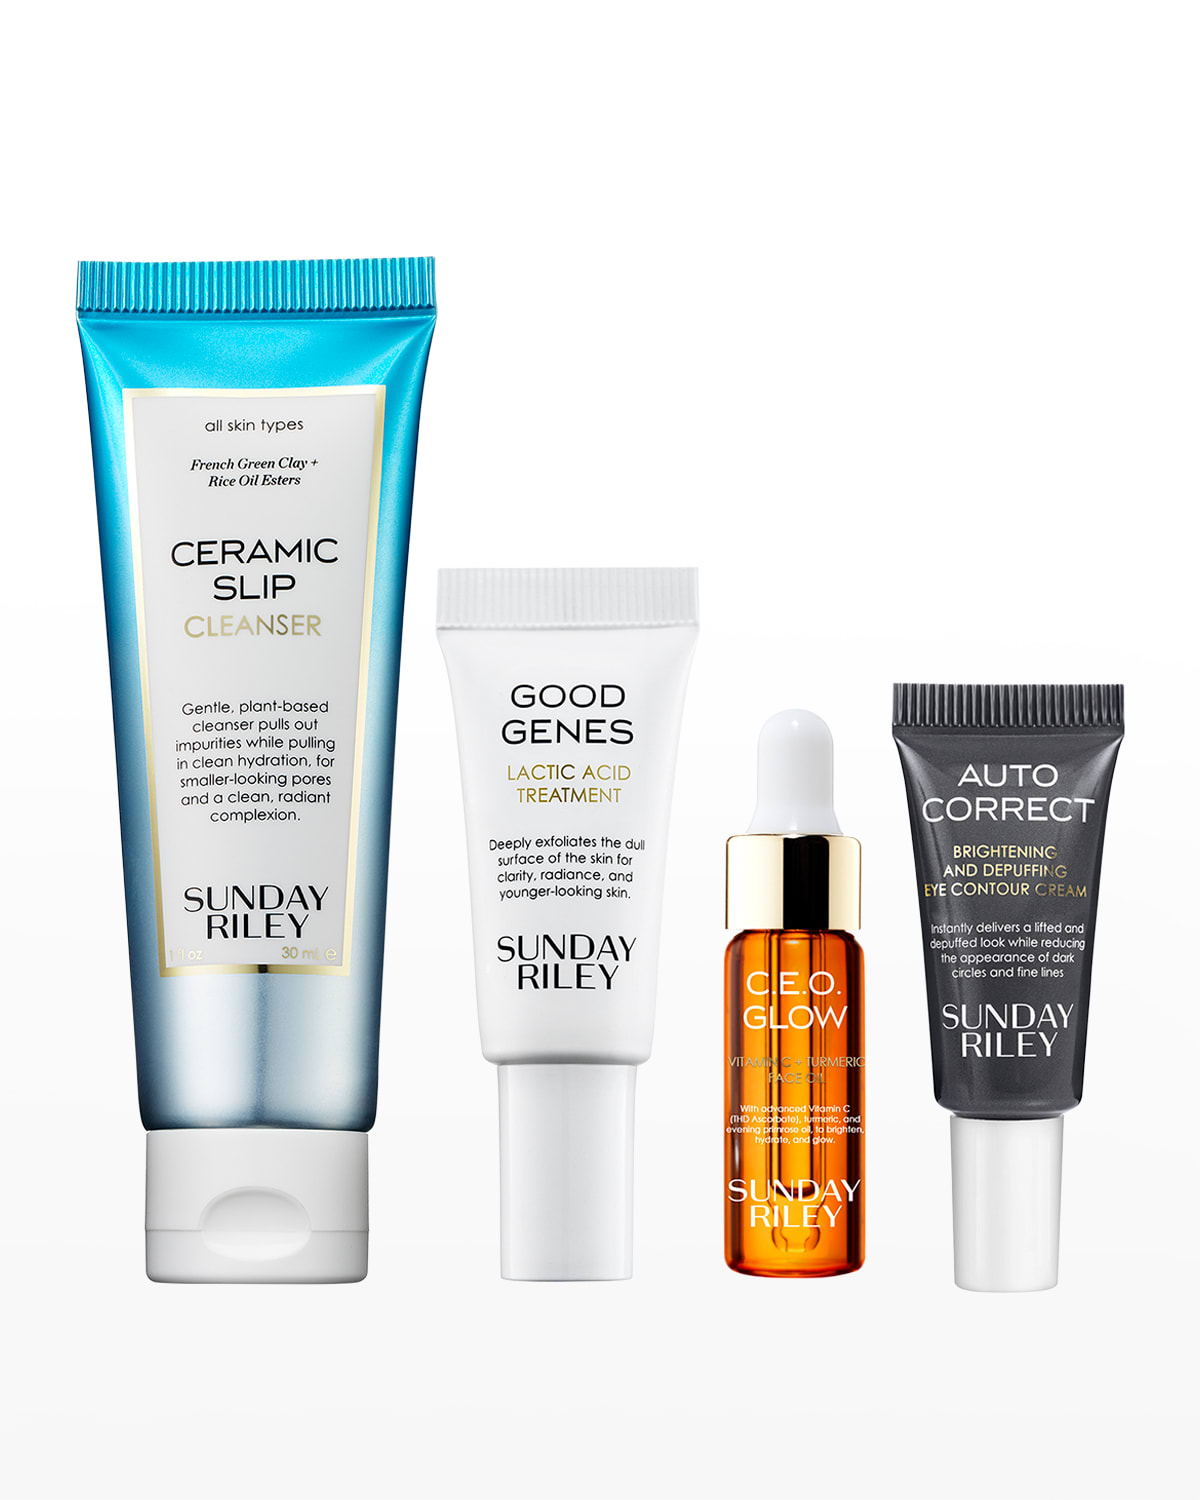 Bundle 1, Yours with any $125 Sunday Riley Modern Skincare Purchase